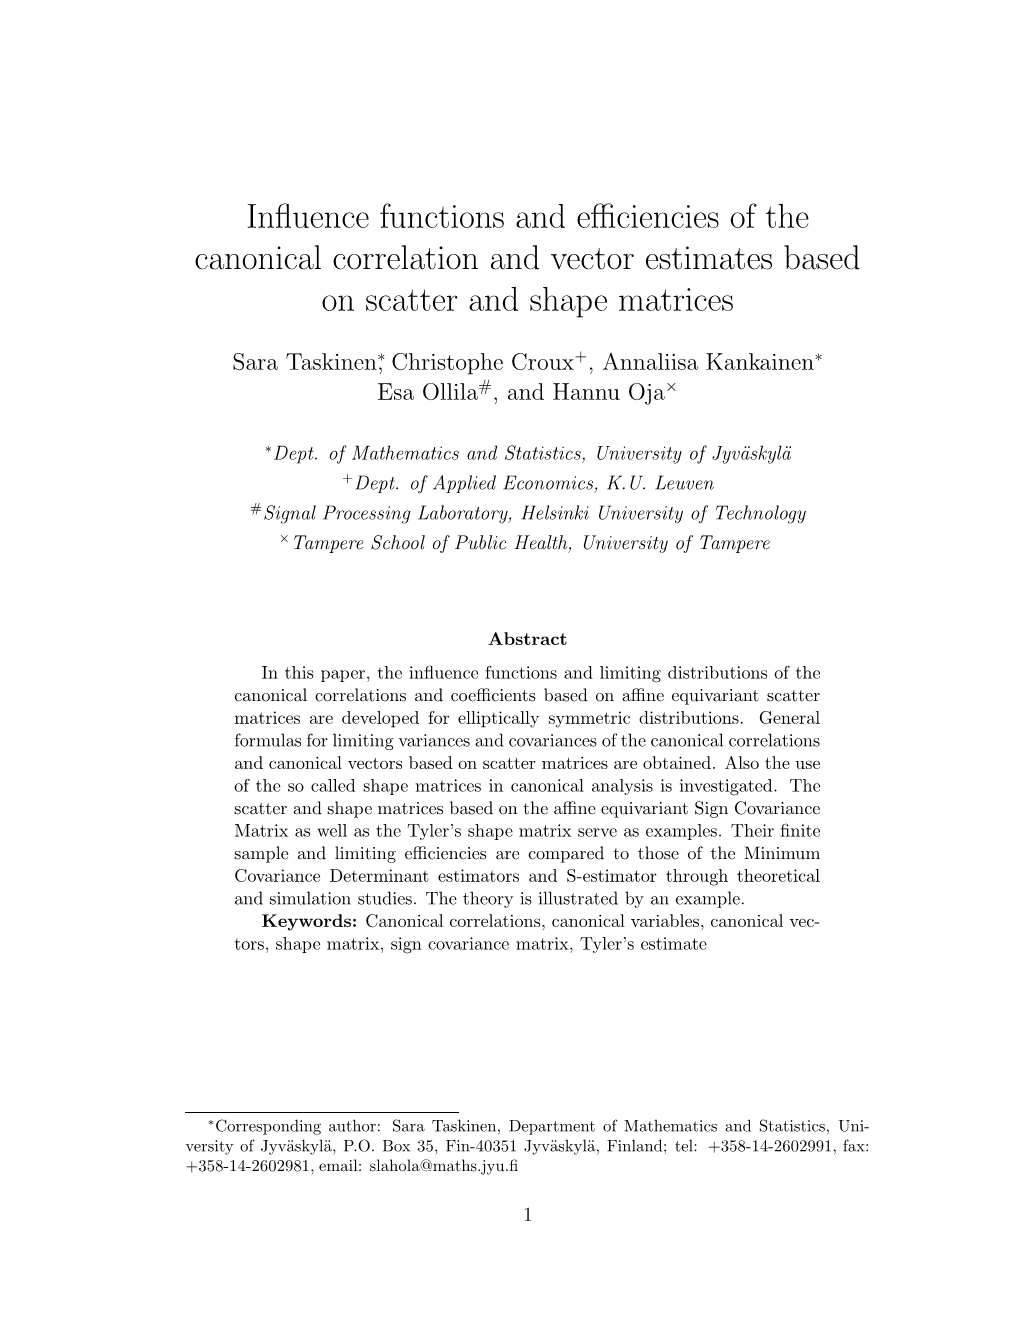 Influence Functions and Efficiencies of the Canonical Correlation and Vector